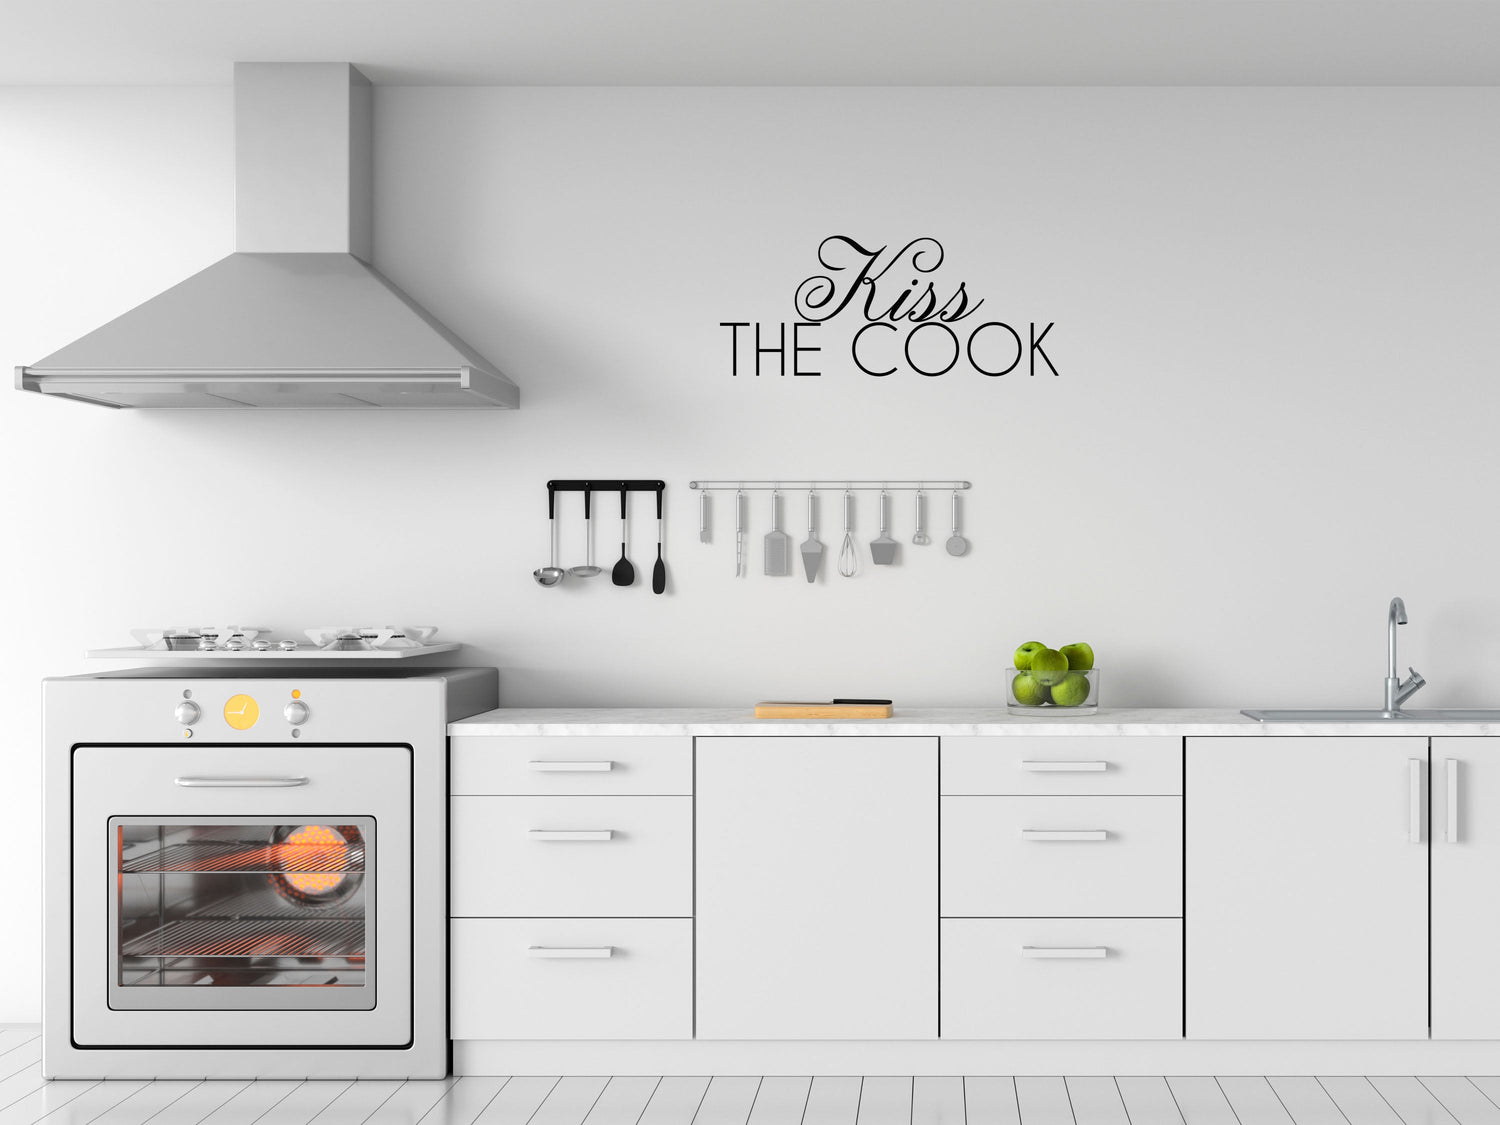 Stylish Kitchen Wall Decals: Transform Your Space with Elegance